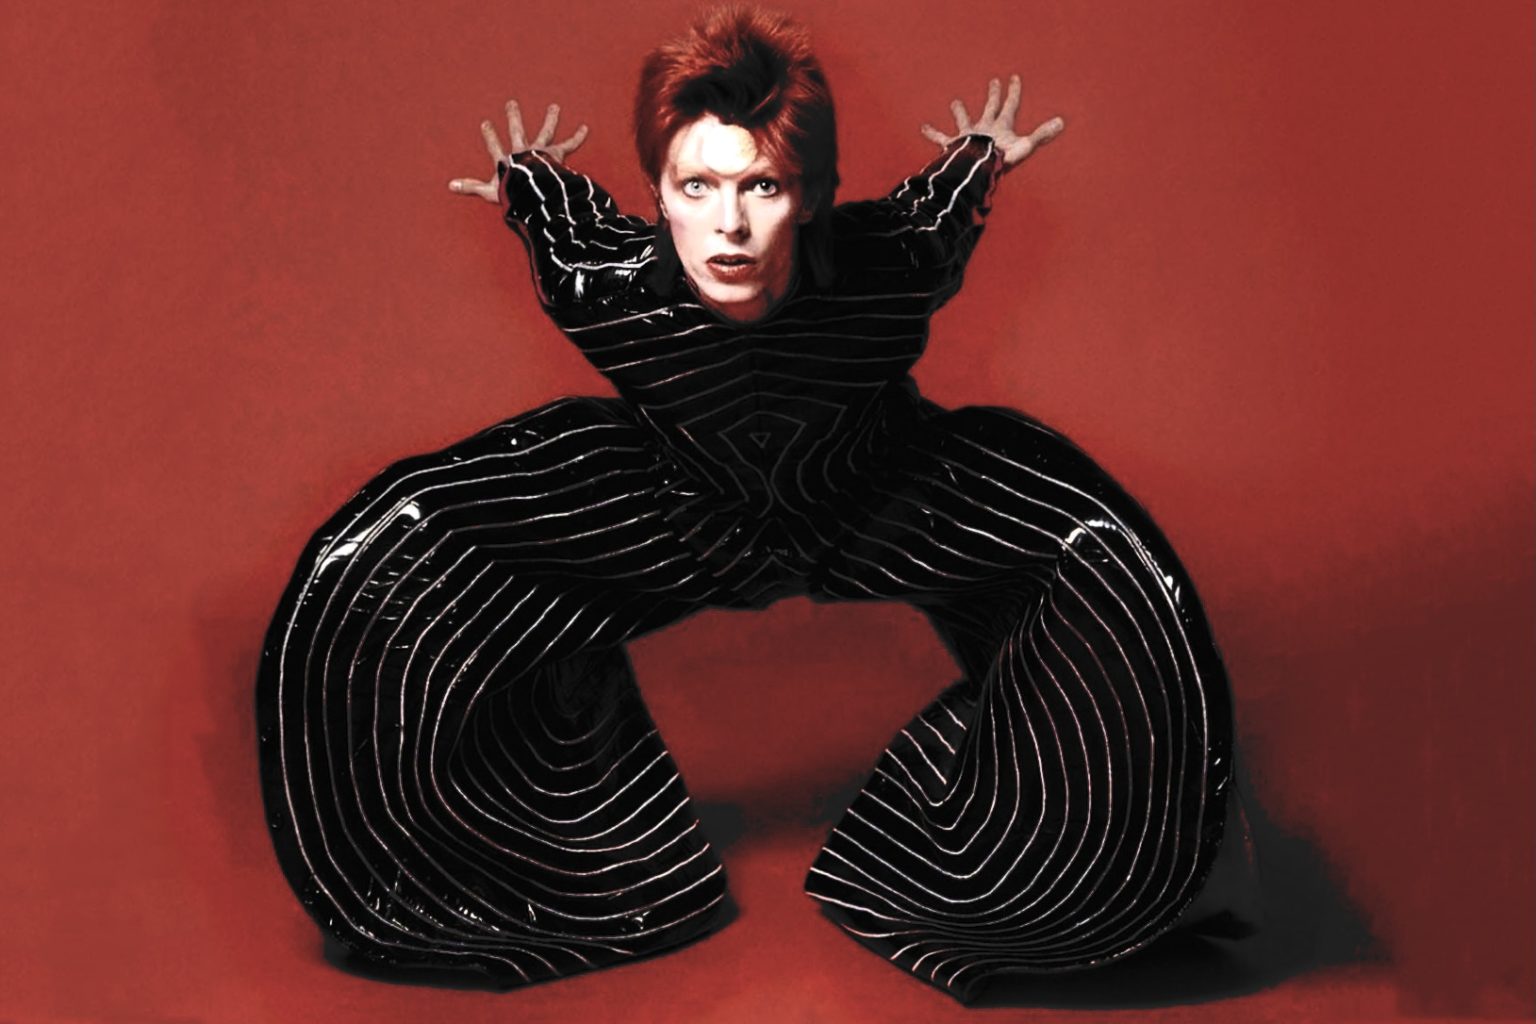 David Bowie- A Space Oddity himself! Know the Glam, the Punk, the Art!